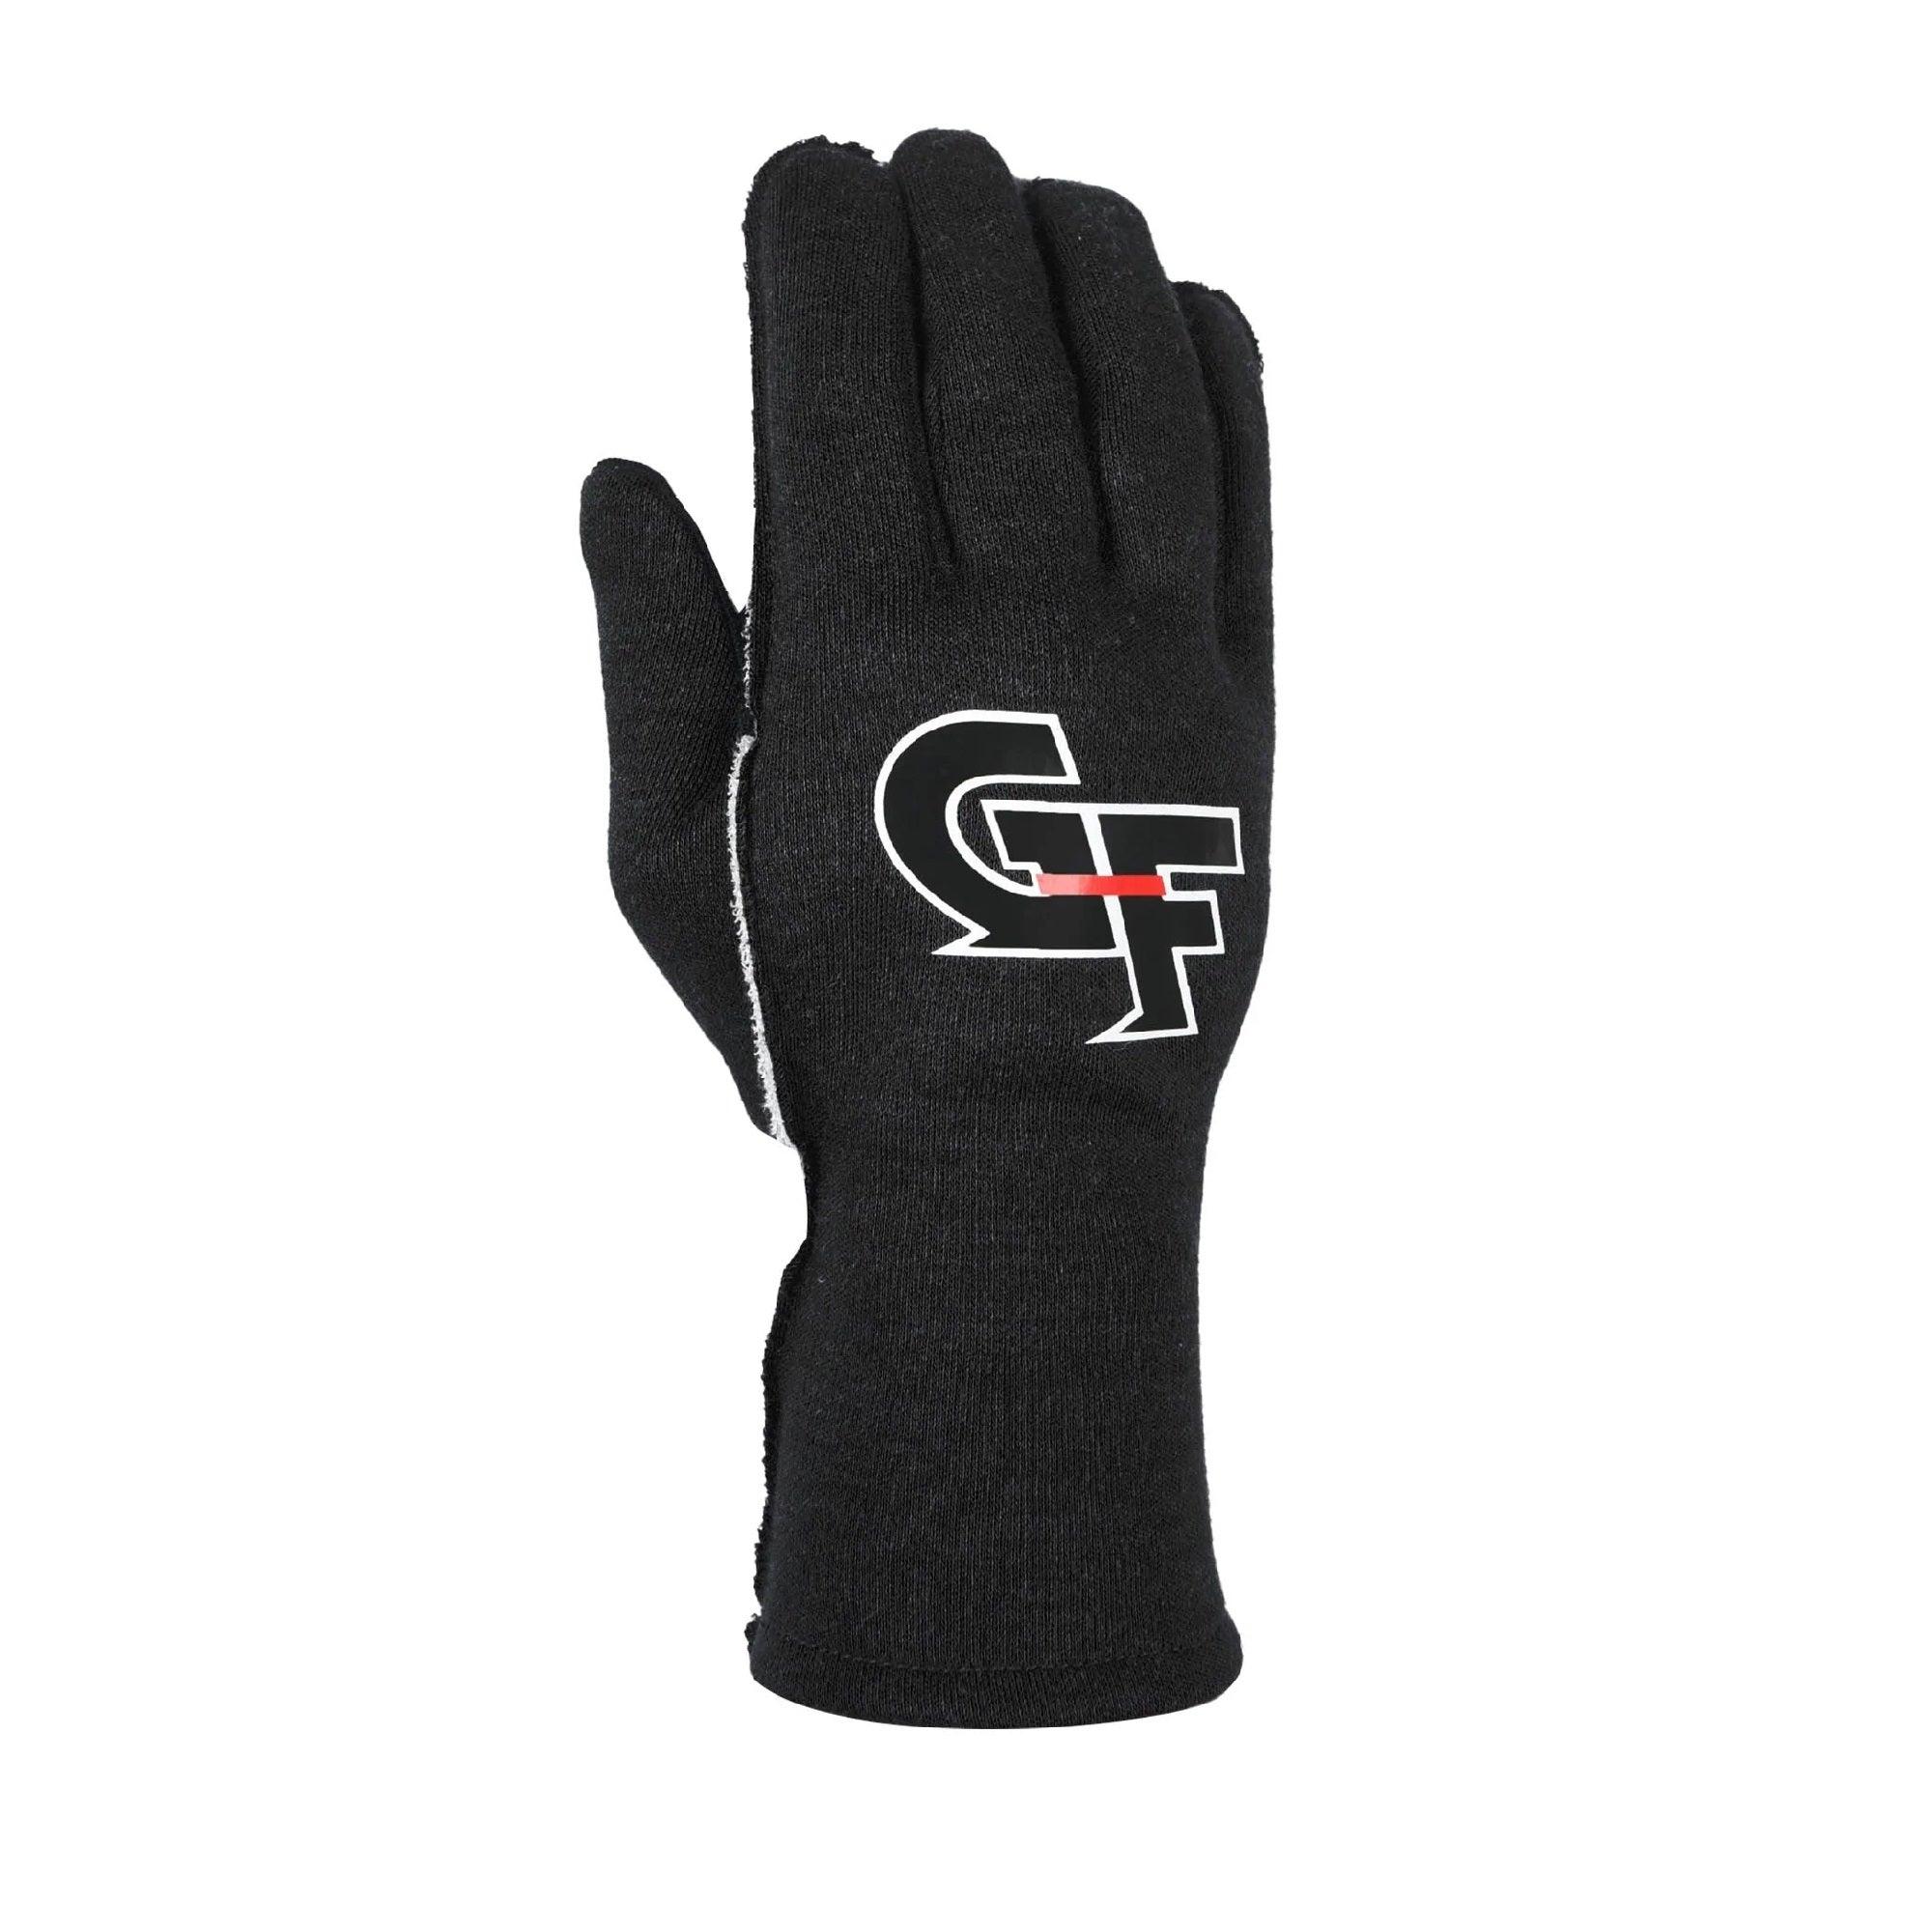 Gloves G-Limit X-Small Black - Burlile Performance Products